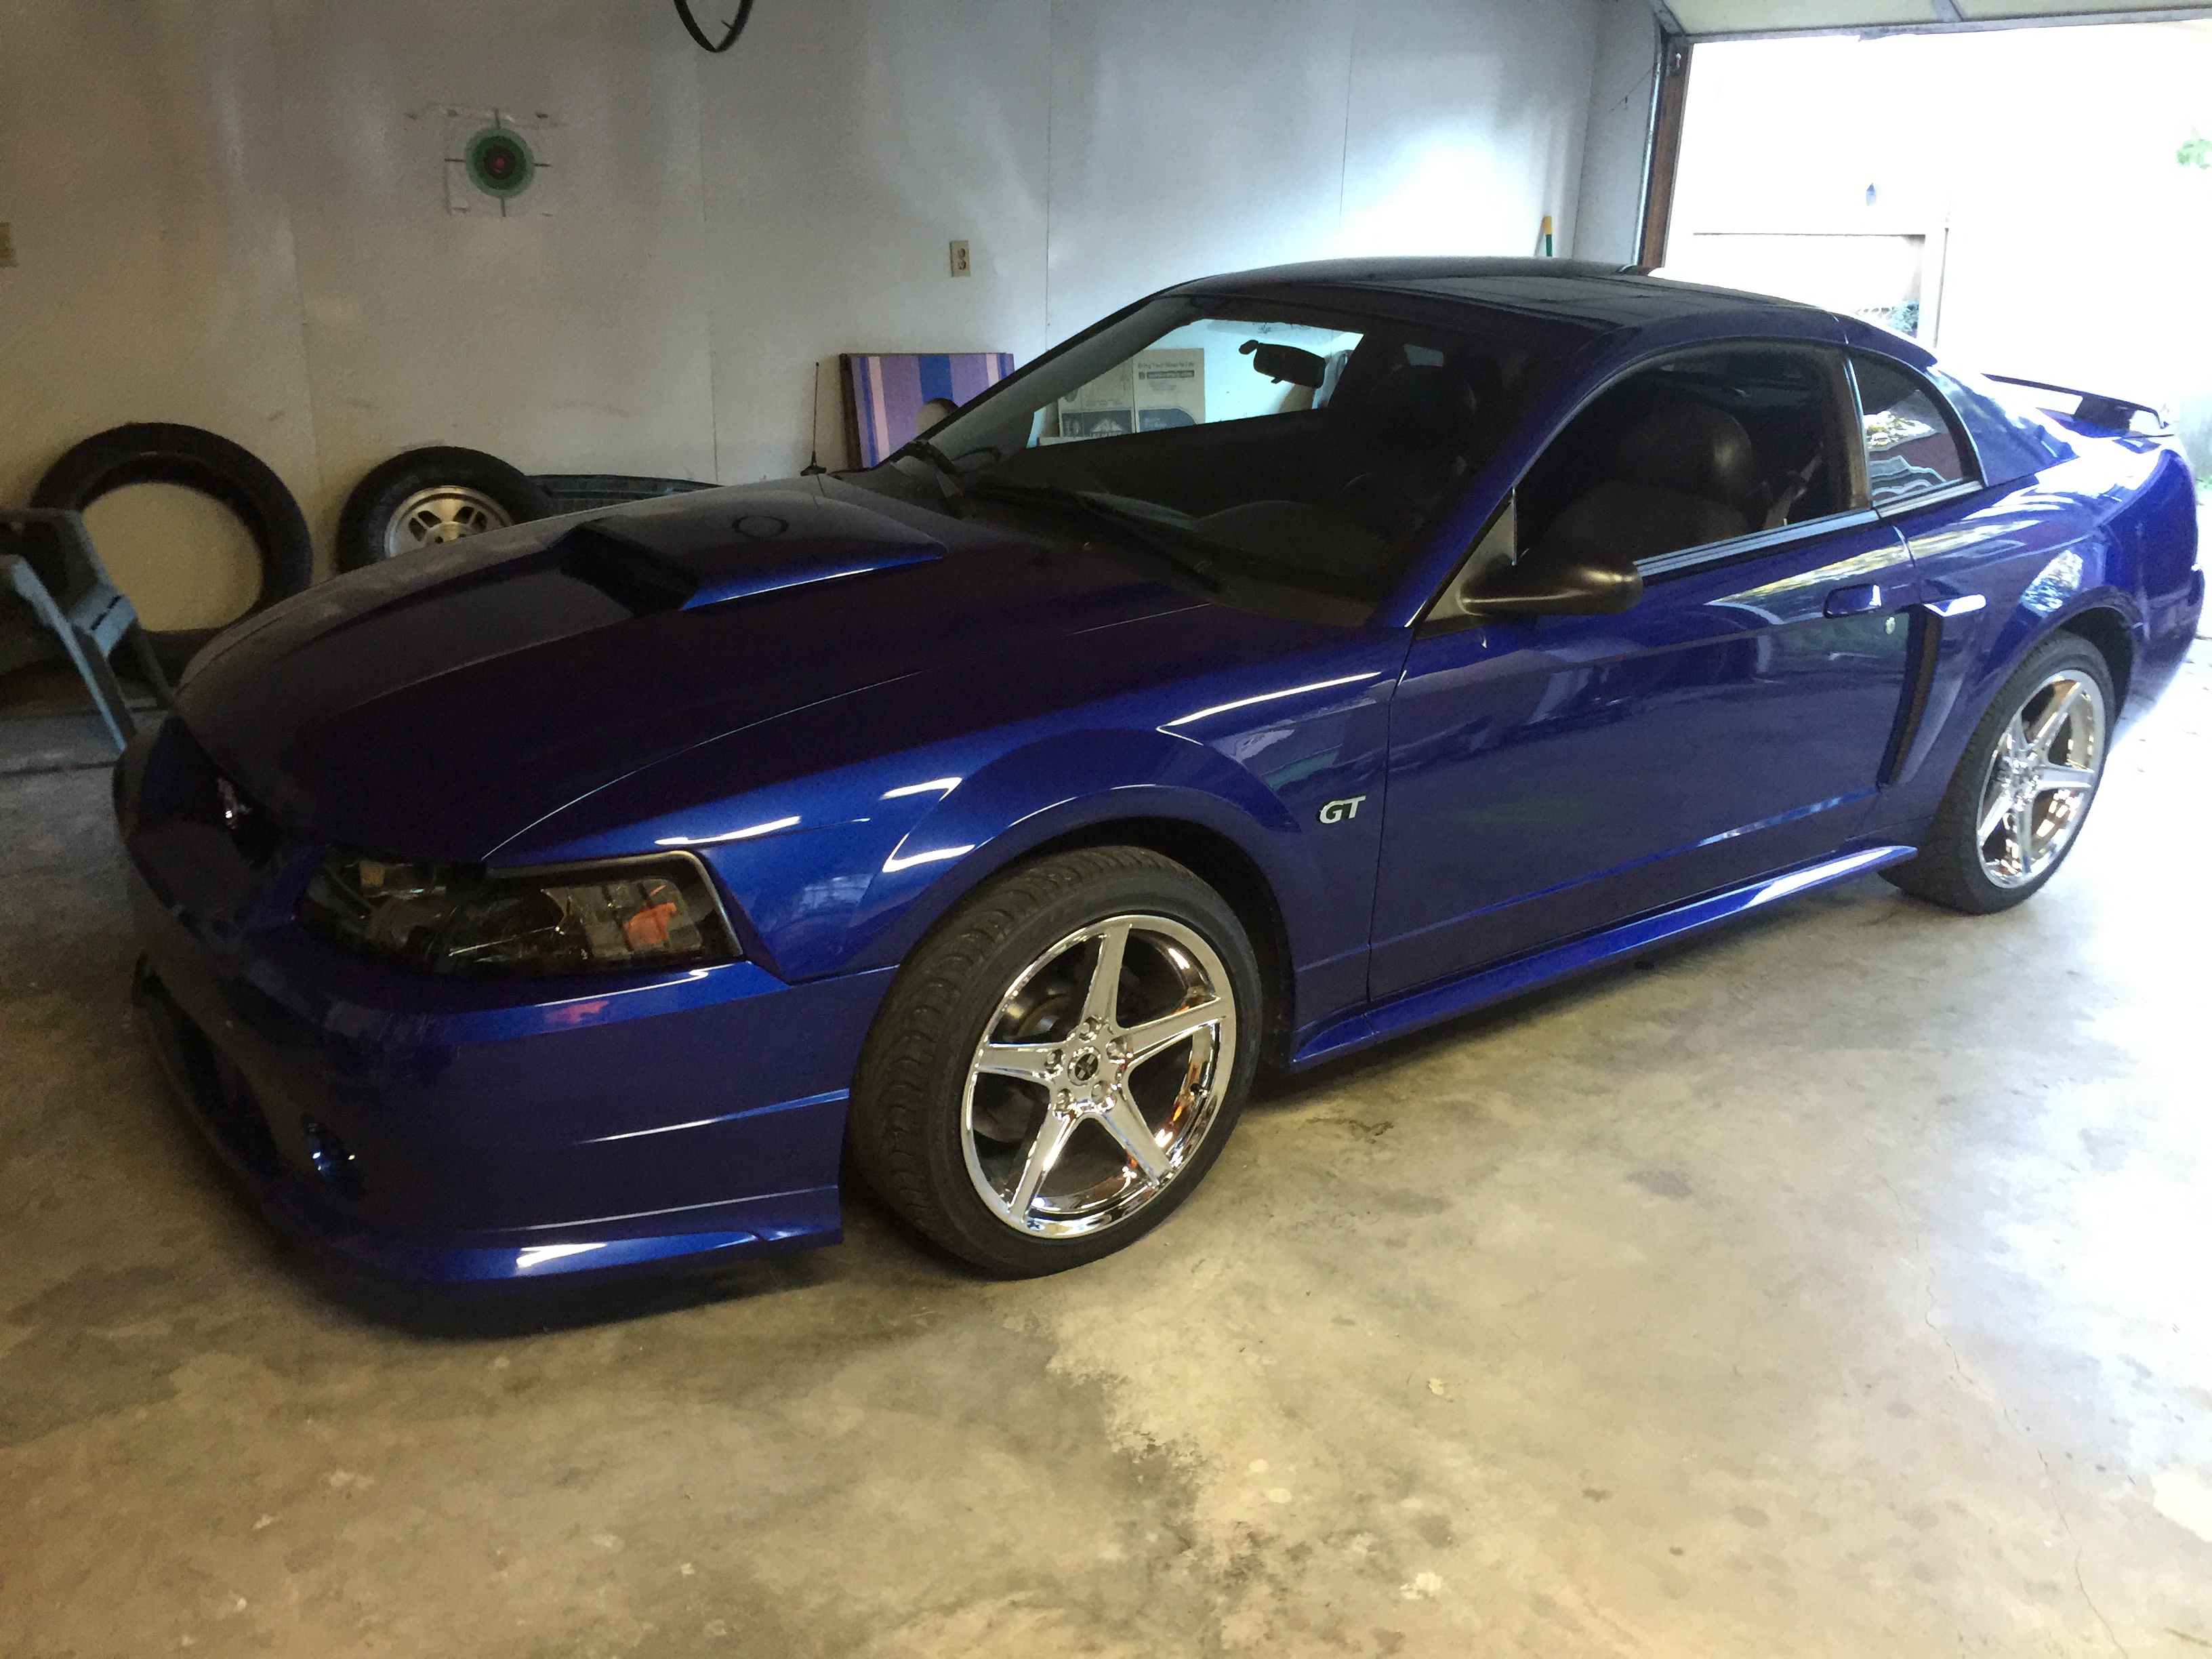 2004 Ford Mustang GT, Springfield, IL. Mobile dent removal http://217dent.com